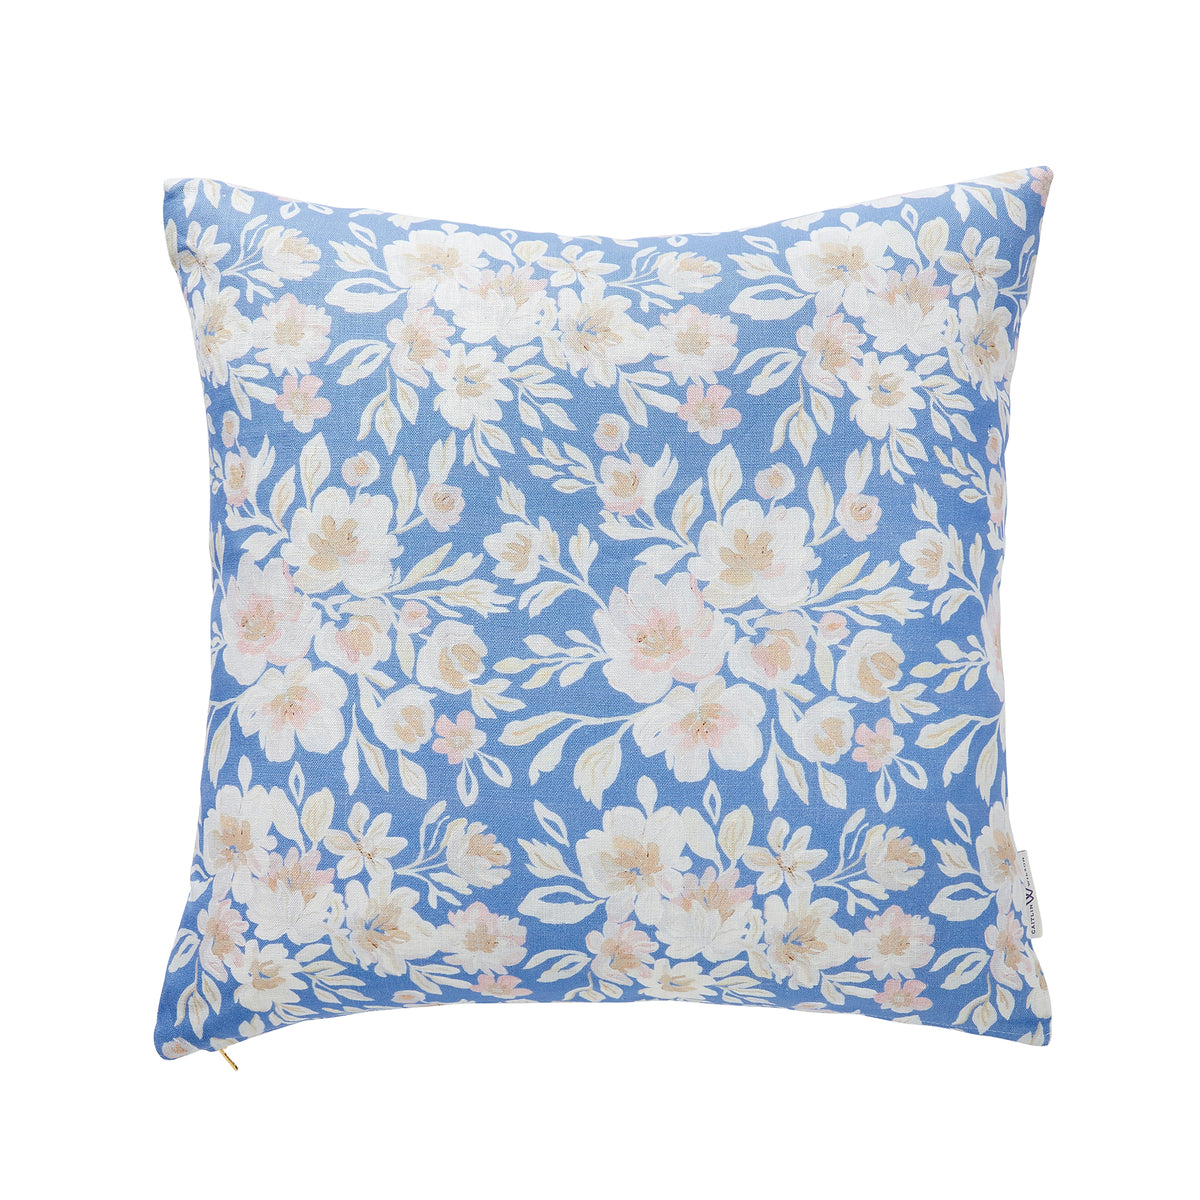 Beatrice Pillow with Blue Flowers